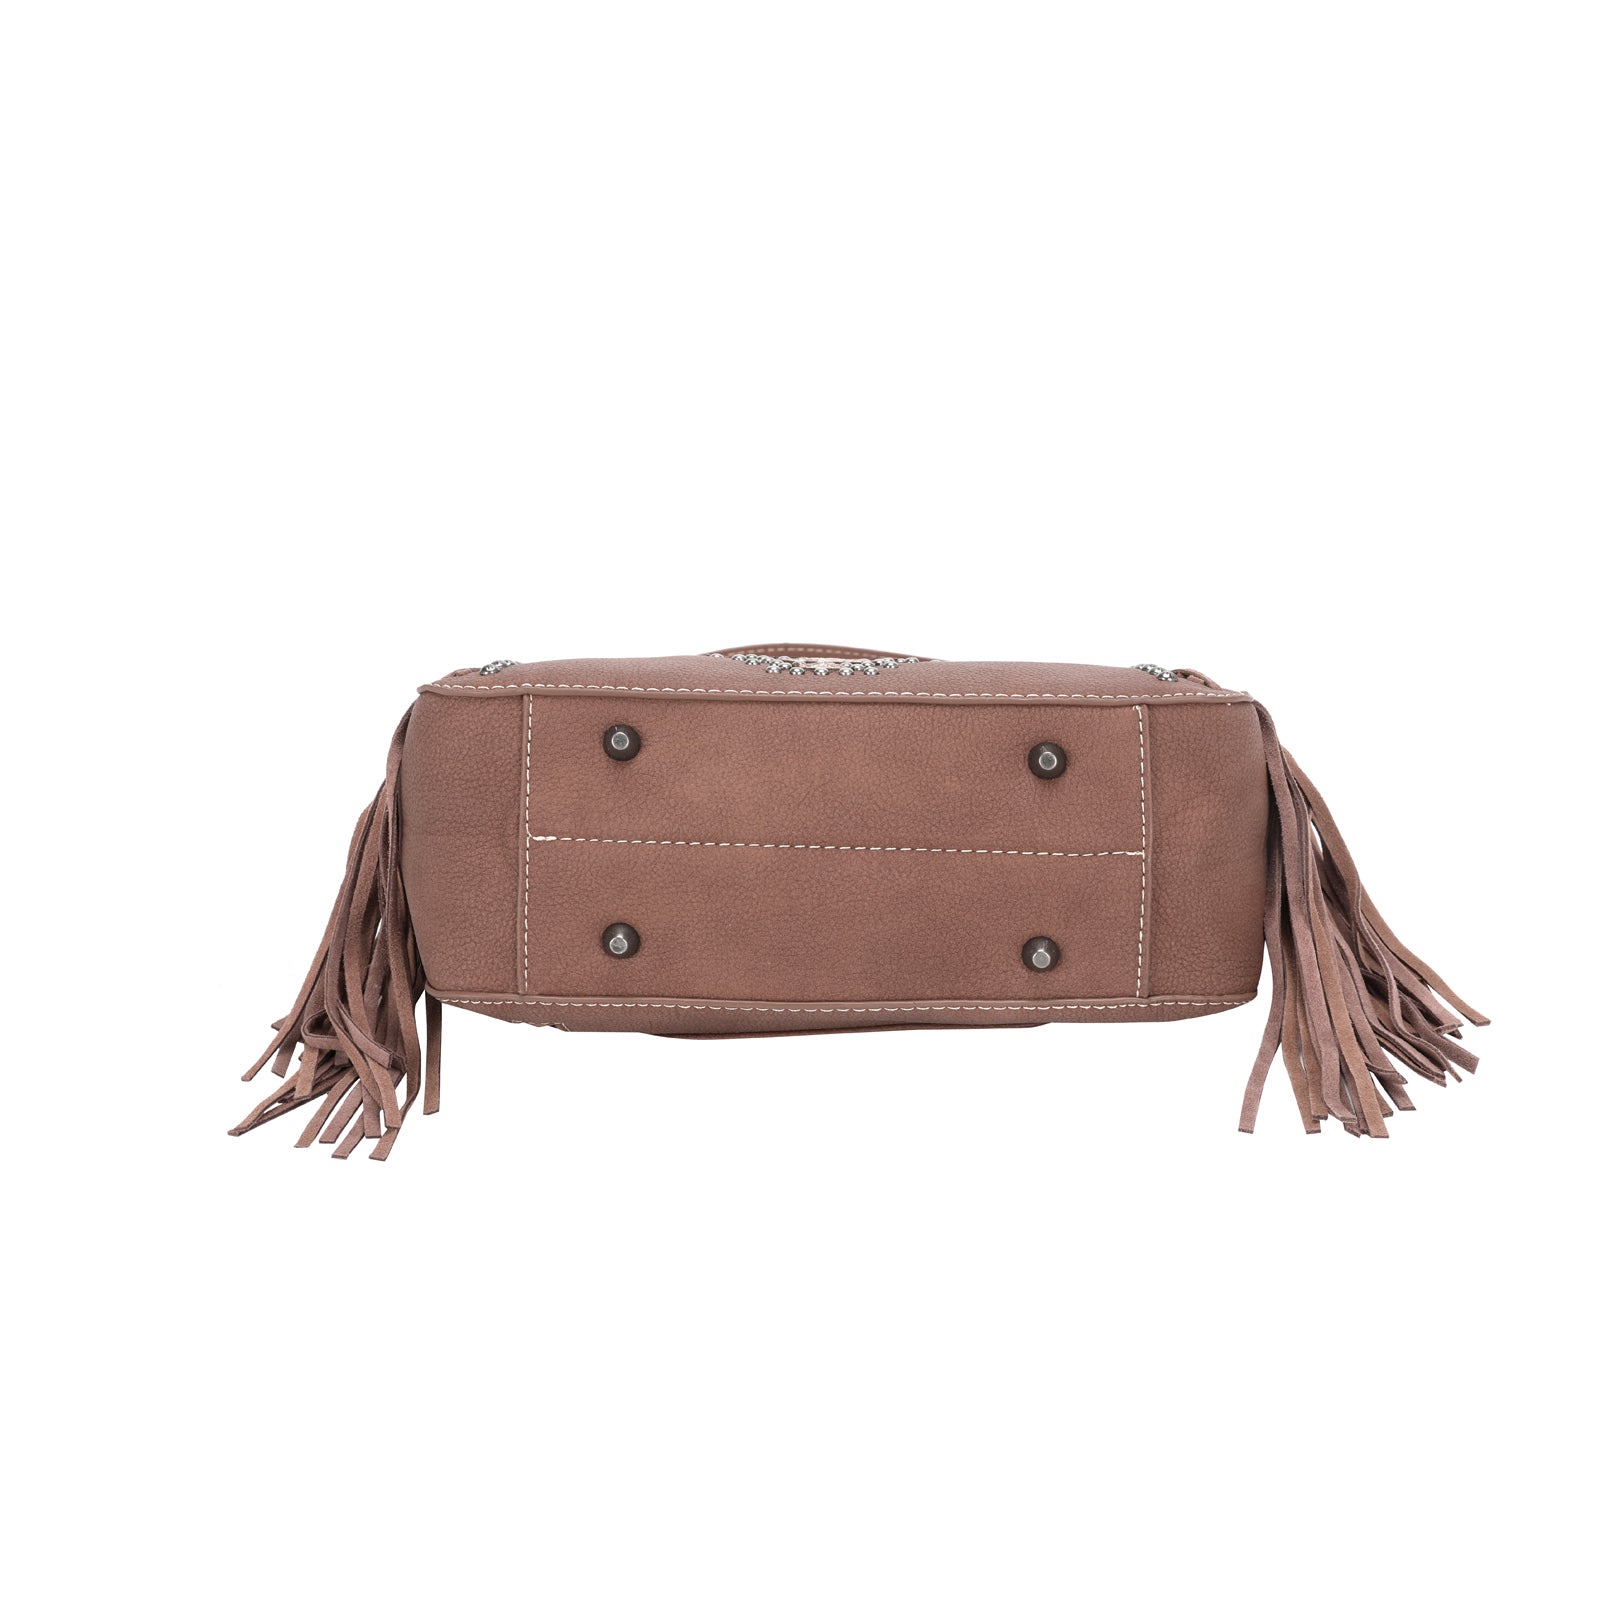 Montana West Aztec Collection Concealed Carry Hobo - Cowgirl Wear